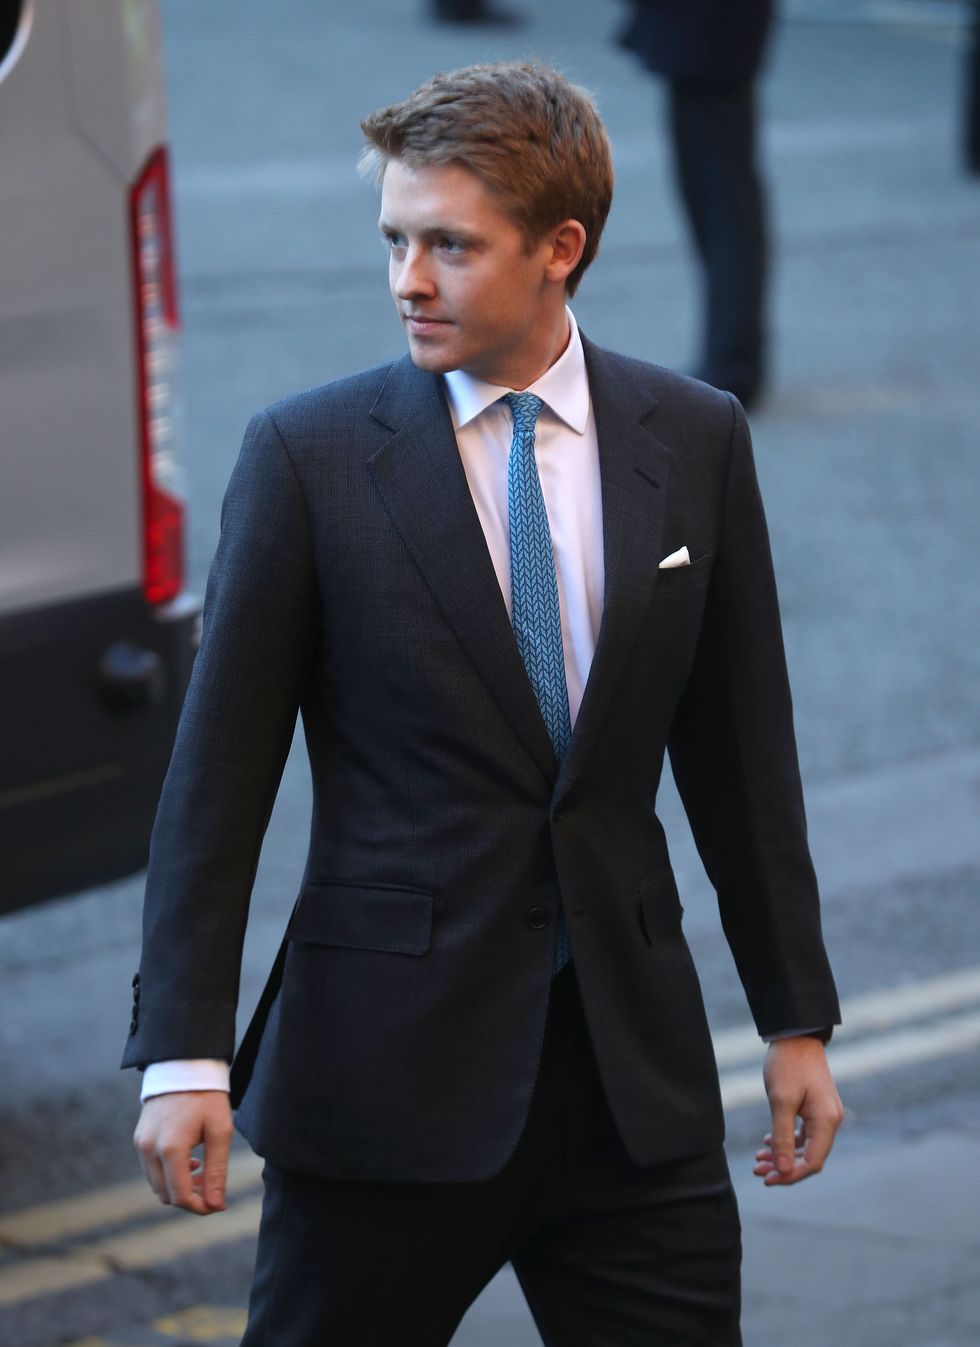 the 7th duke of westminster, hugh grosvenor, arriving for a memorial service to celebrate the life of his father, the sixth duke of westminster at chester cathedral, chester photo by peter byrnepa images via getty images